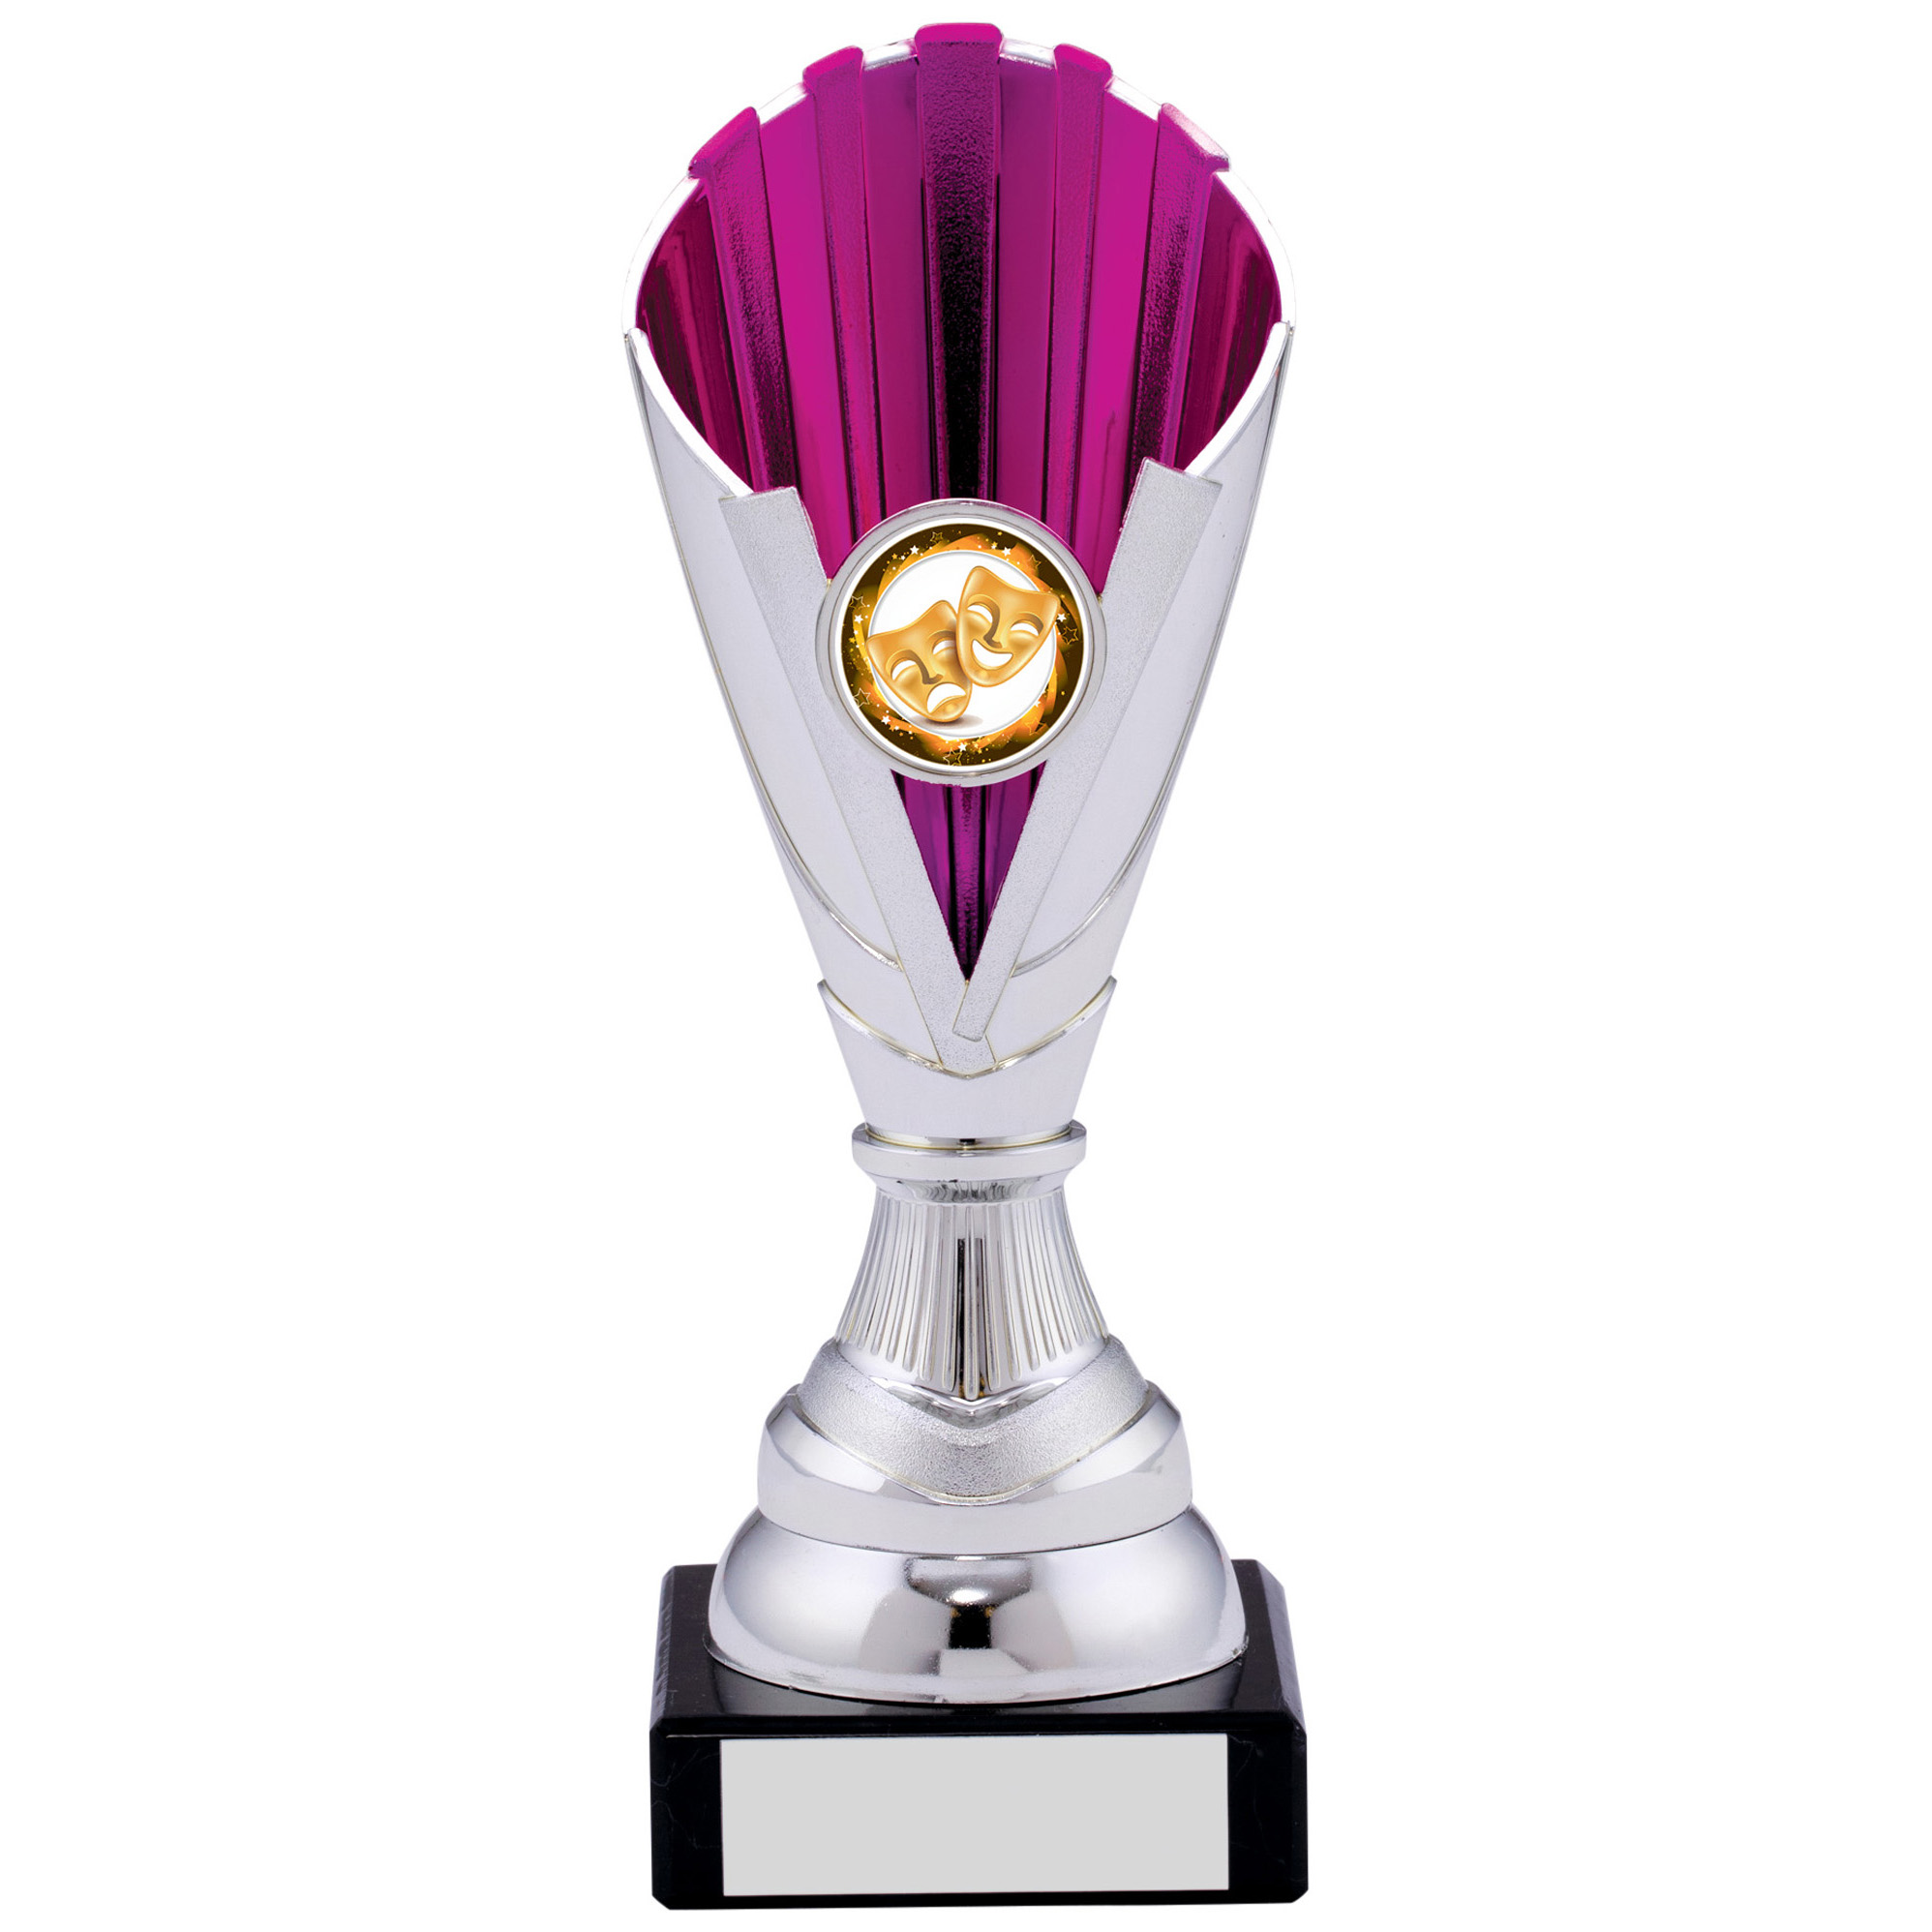 SILVER PINK TROPHY